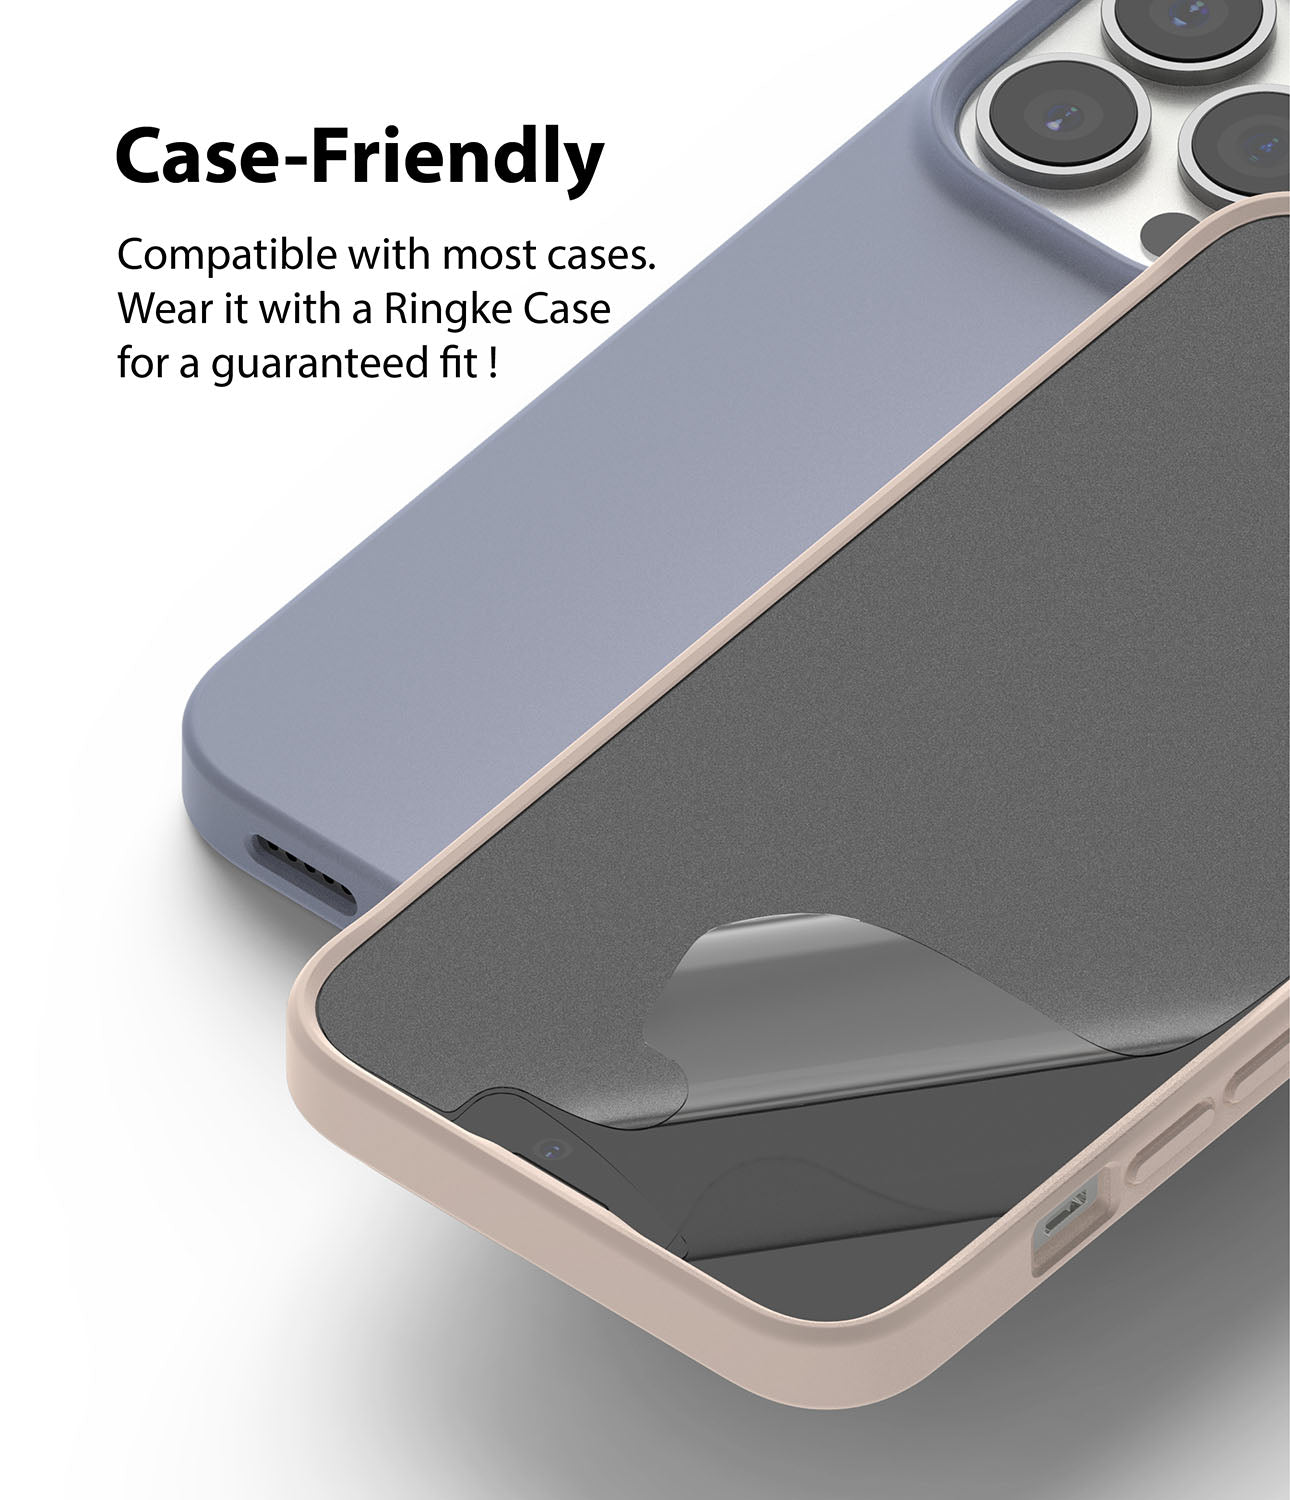 iPhone 13 Pro Max Screen Protector | Dual Easy Film Matte - Case-Friendly. Compatible with most cases. Wear it with a Ringke case for a guaranteed fit.